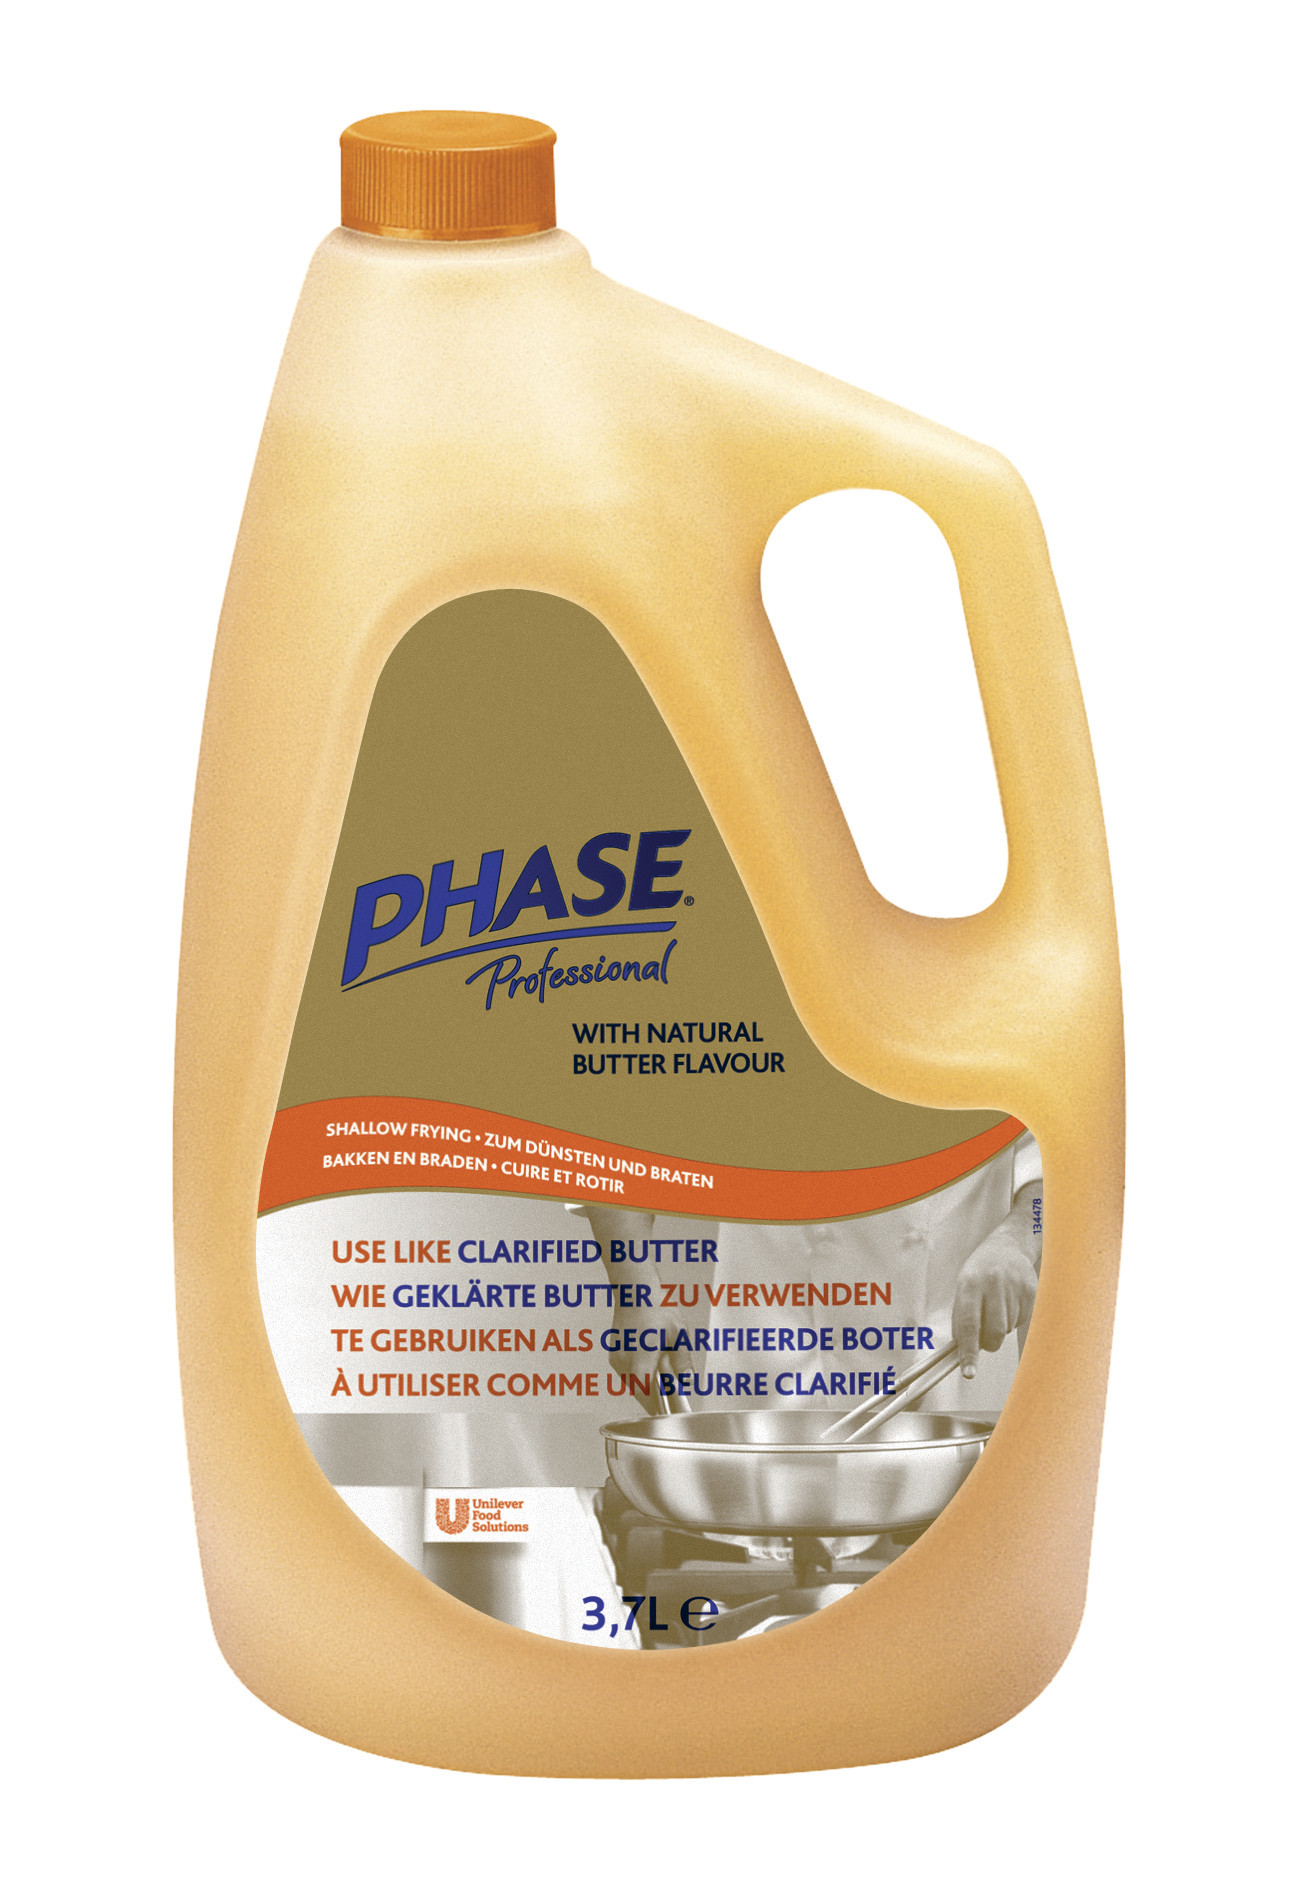 Phase Butter Flavour 3.7L margarine liquide